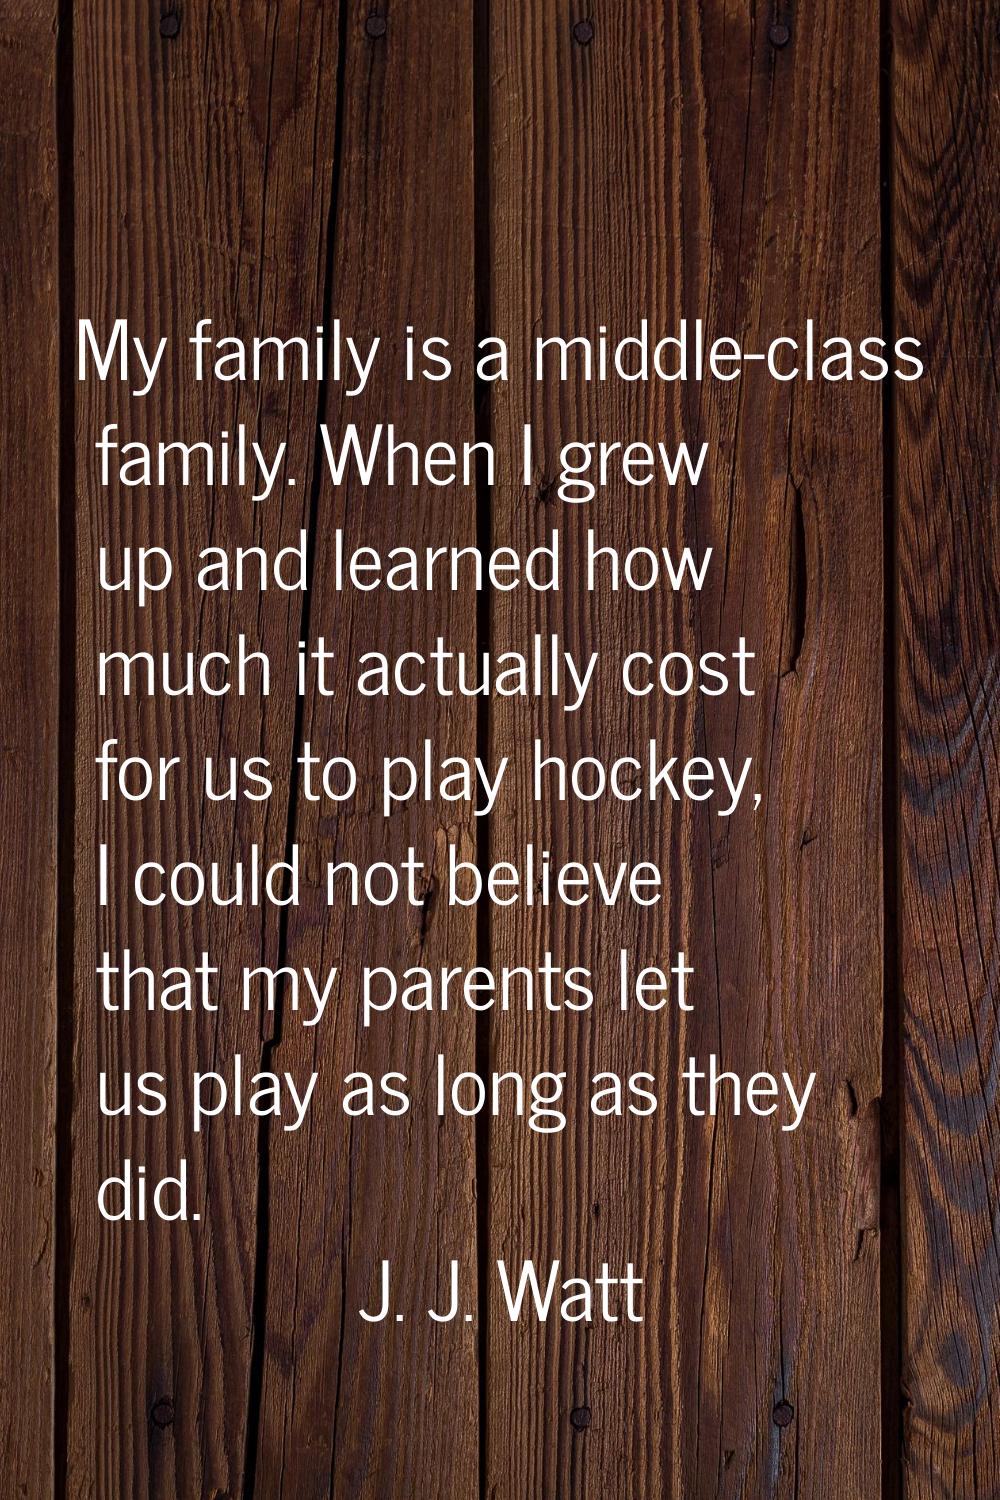 My family is a middle-class family. When I grew up and learned how much it actually cost for us to 